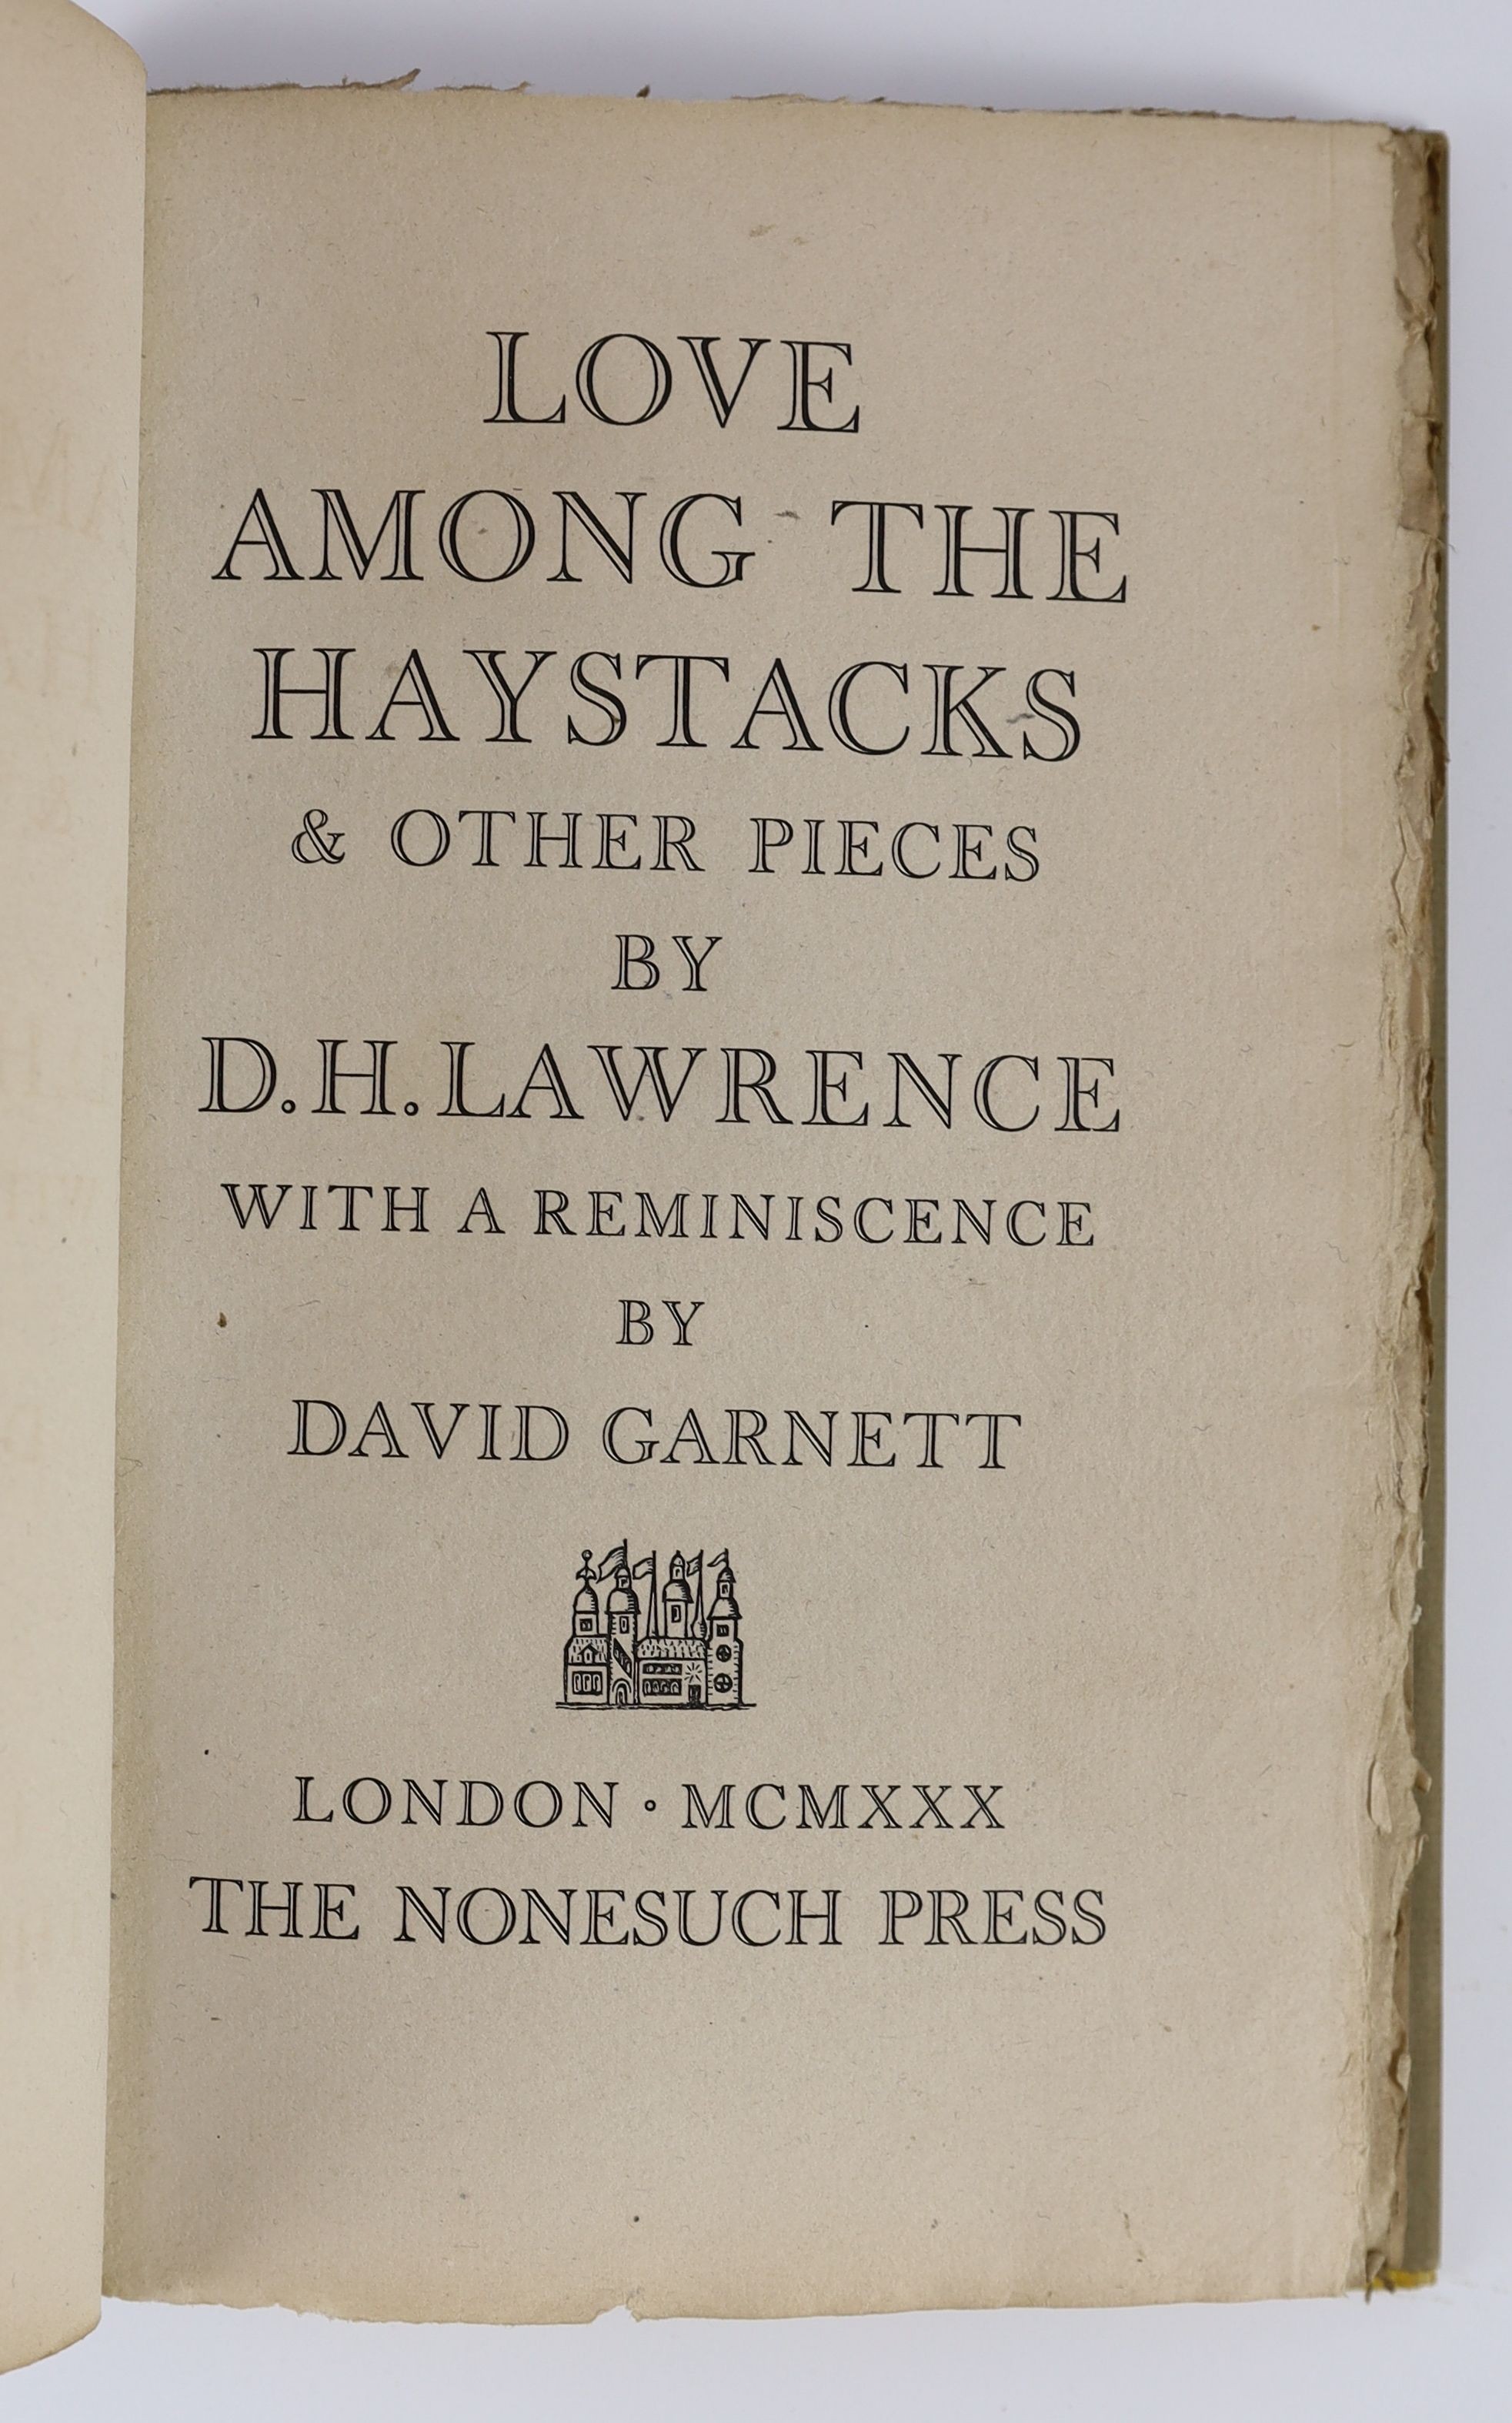 Nonesuch Press - 4 works - Lawrence, David Herbert - Love Among the Haystacks, one of 1600, 8vo, buckram with d/j, 1930; Lamaratine, A. de - Graziella, one of 1600, translated by Ralph Wright, illustrated by Jacquier, 19